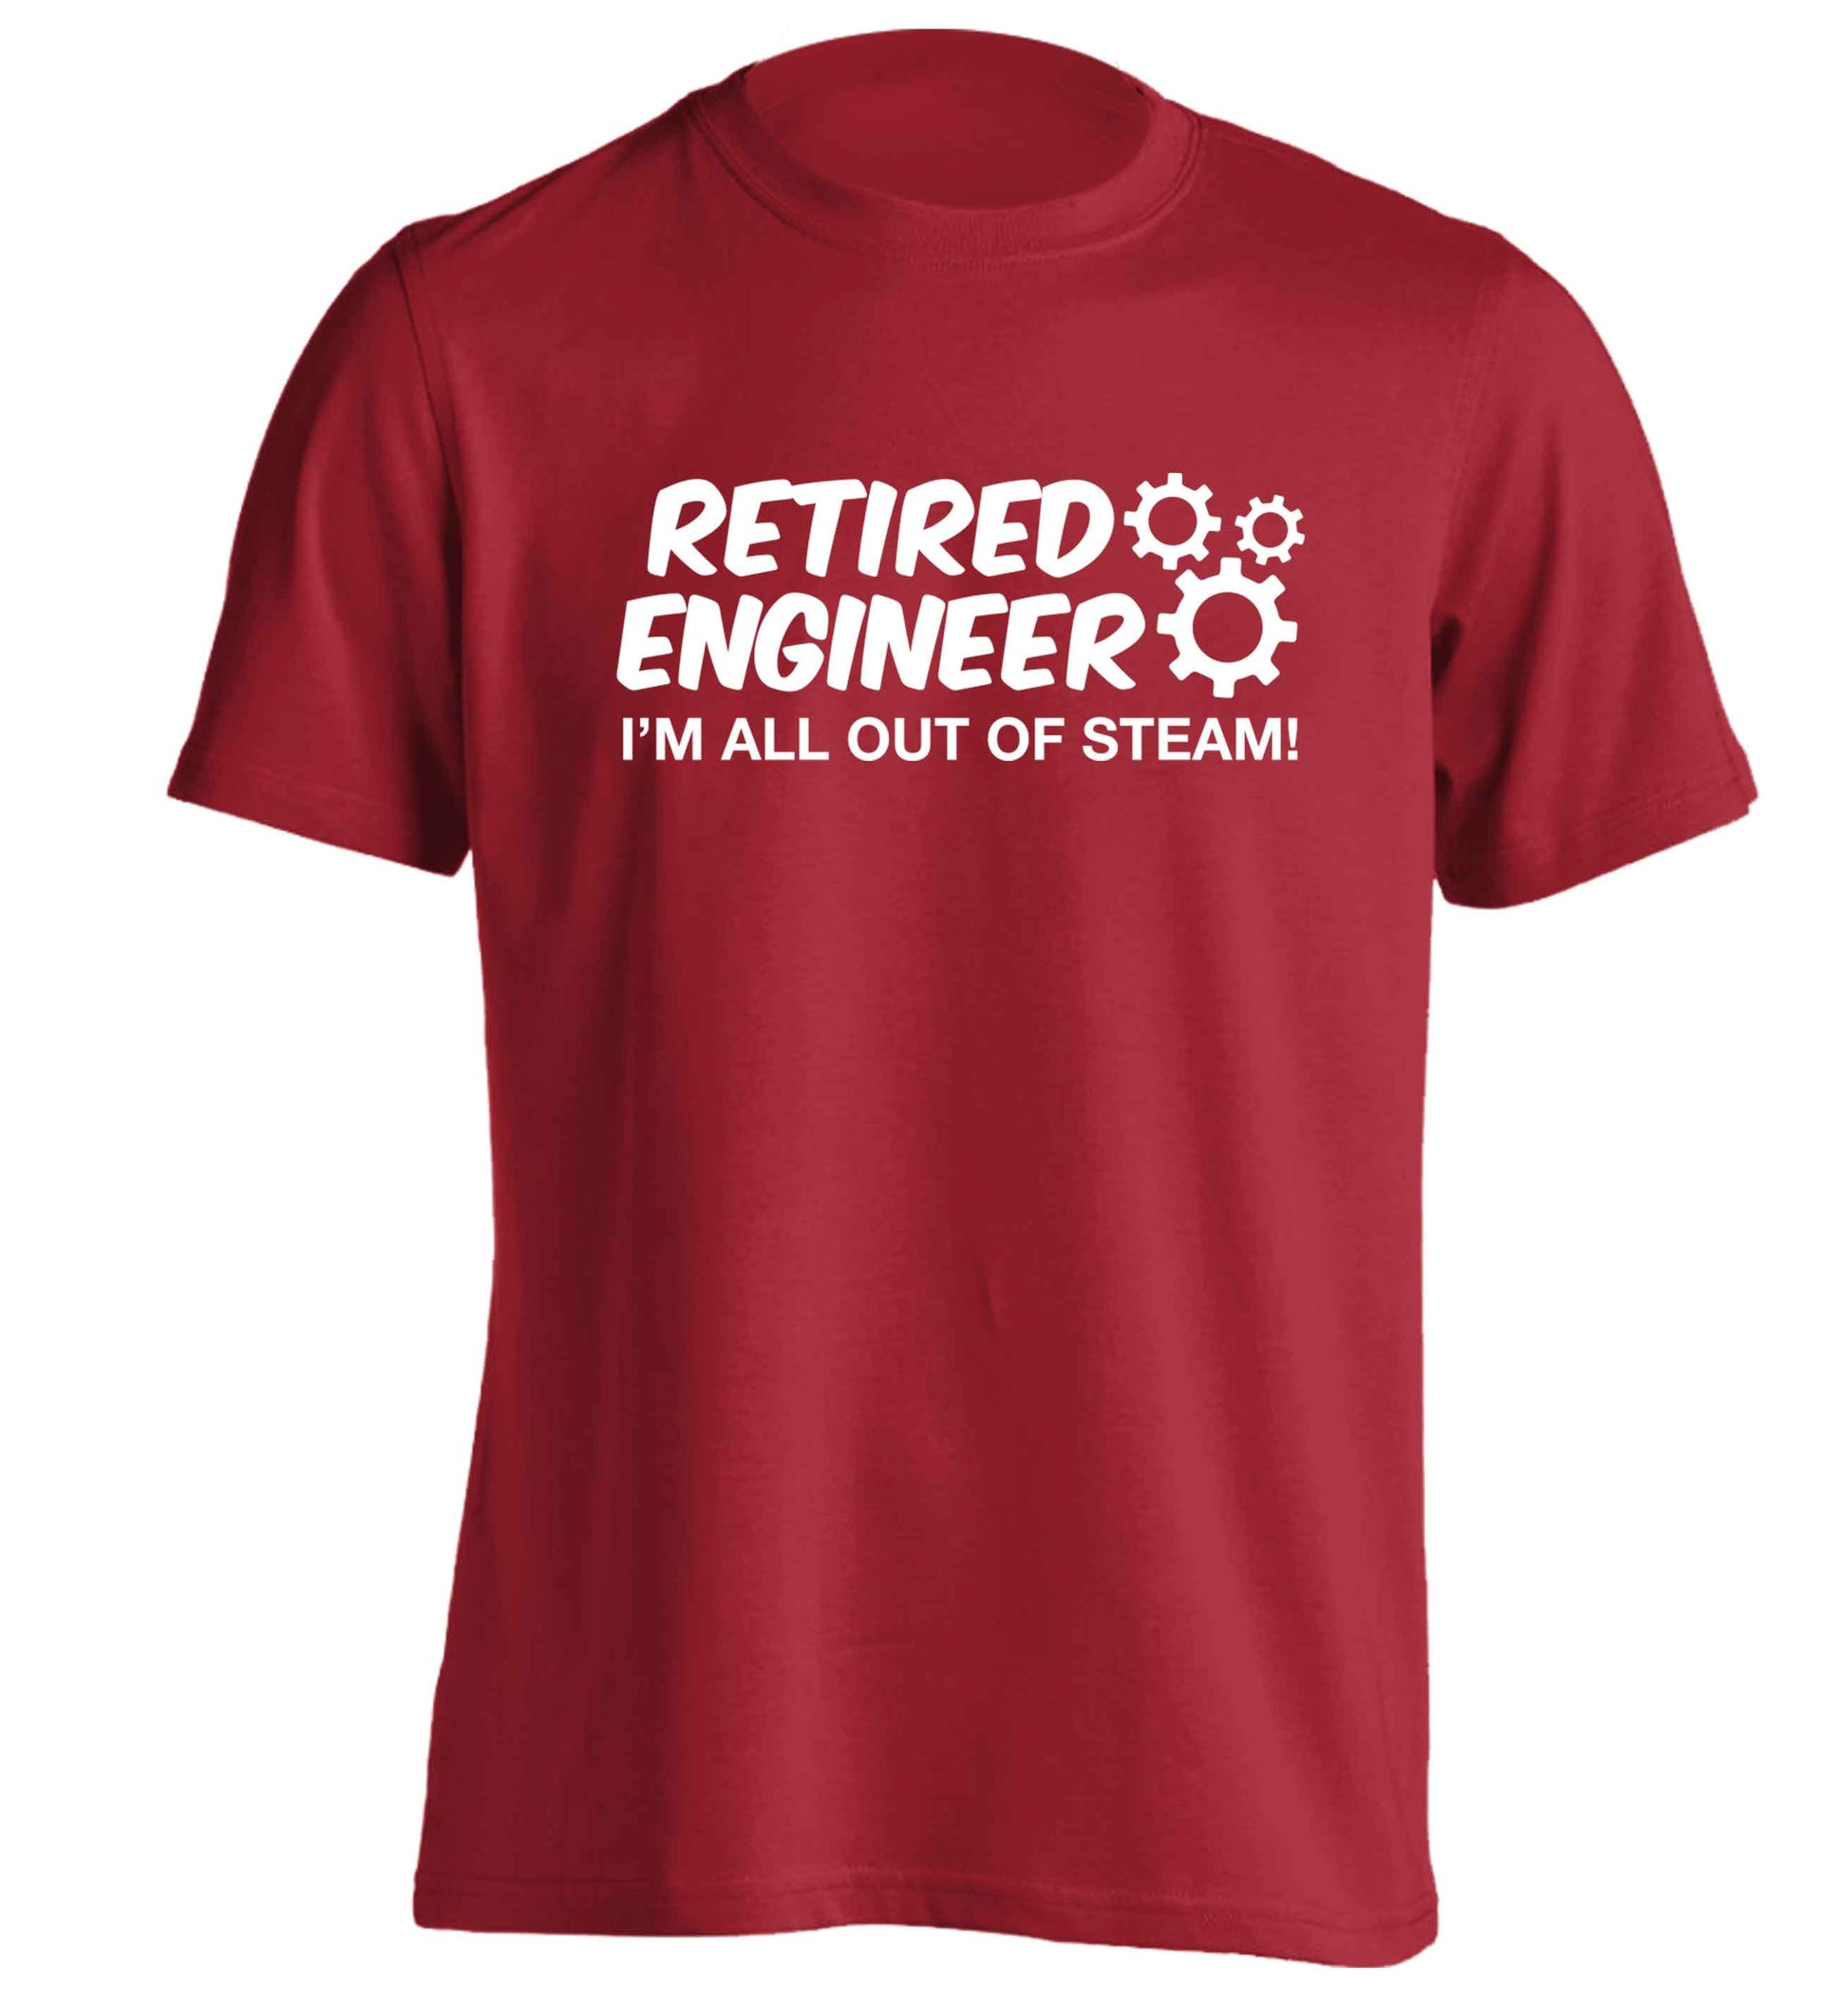 Retired engineer I'm all out of steam adults unisex red Tshirt 2XL